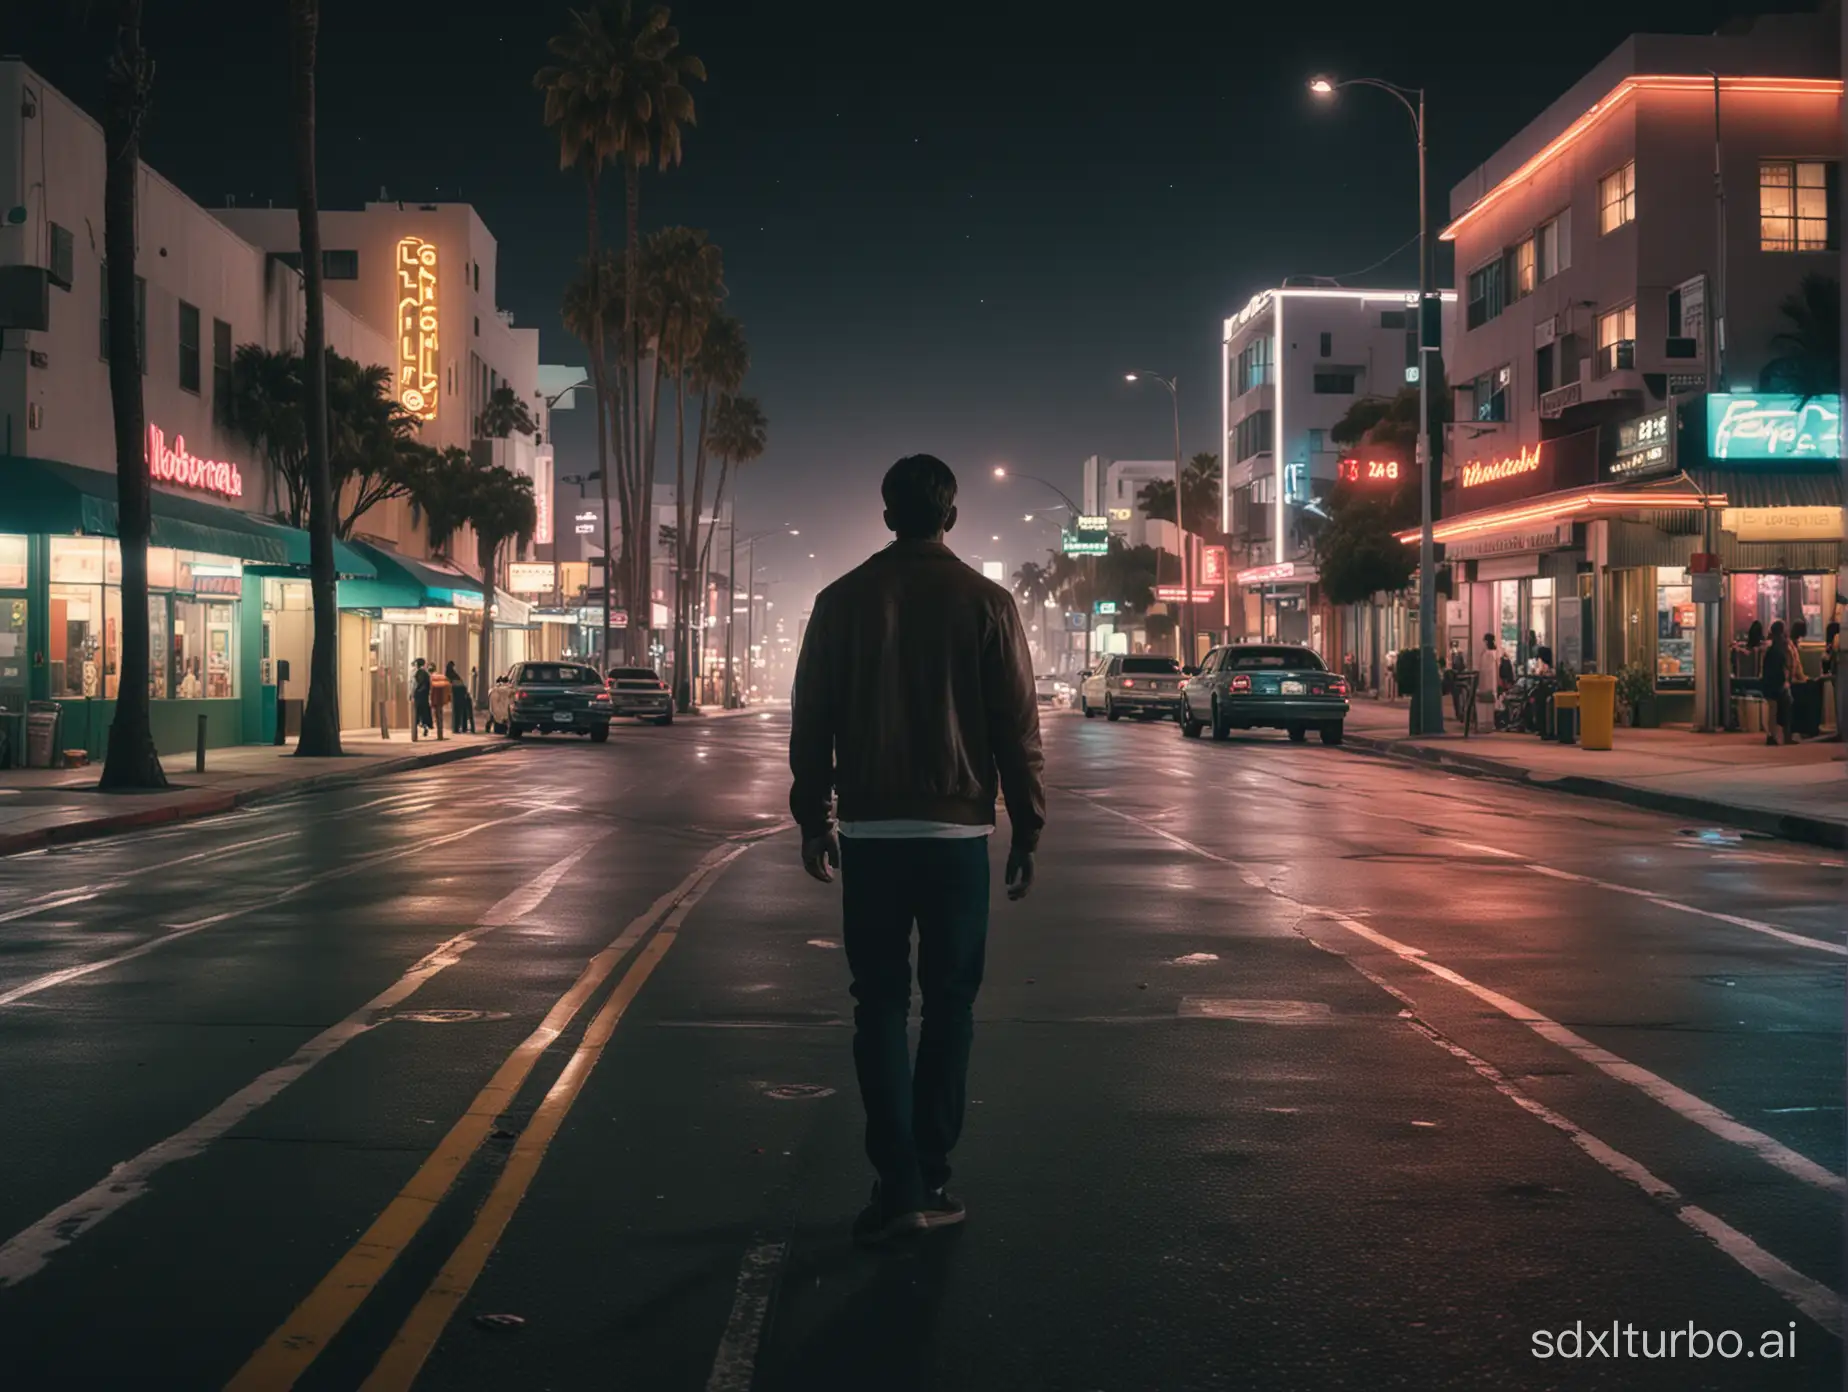 real photography, not draw. lubesky cinematographer style,  style ultrarealistic of los angeles downtons streets near the beach
, at night, with only one person lonely with his back close to the camera, ultraquality, 8k, with some futuristic buildings, very colorful, Shot in a film 4k large format with ryan gosling close to the camera, shot on kodak film stock with 21mm lens